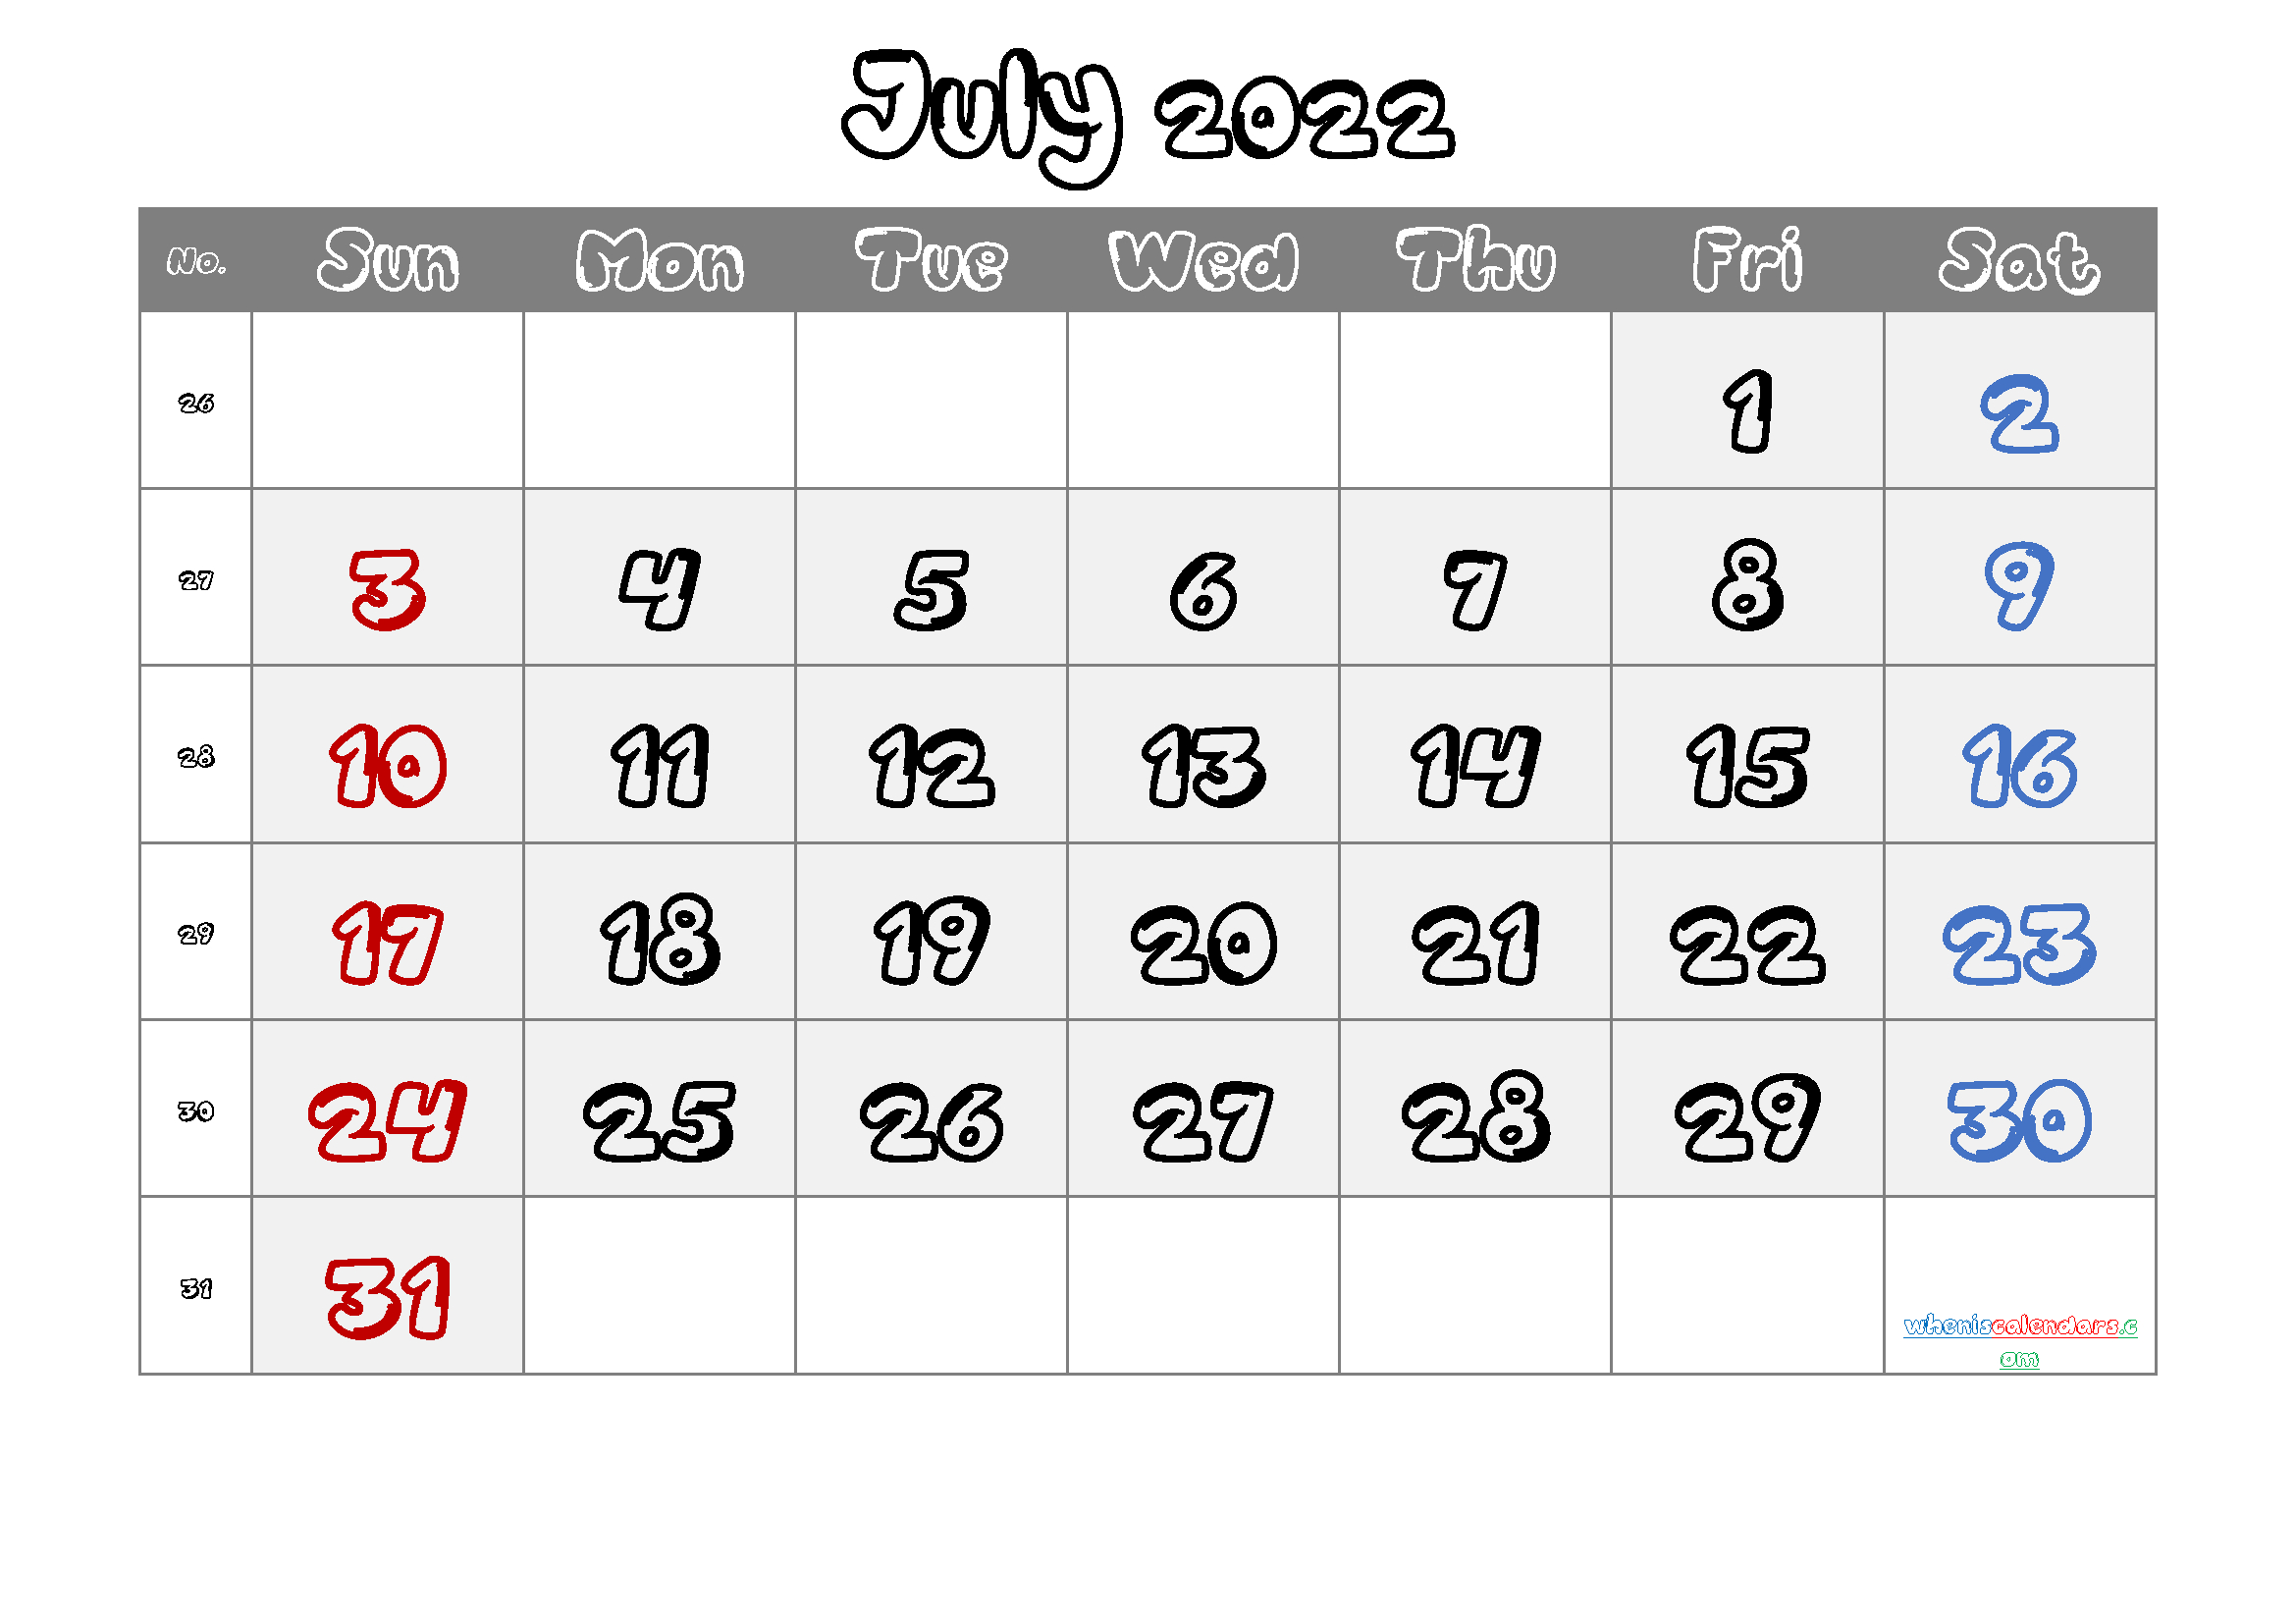 Free Printable Calendar July 2021 And 2022 And 2023 - Free